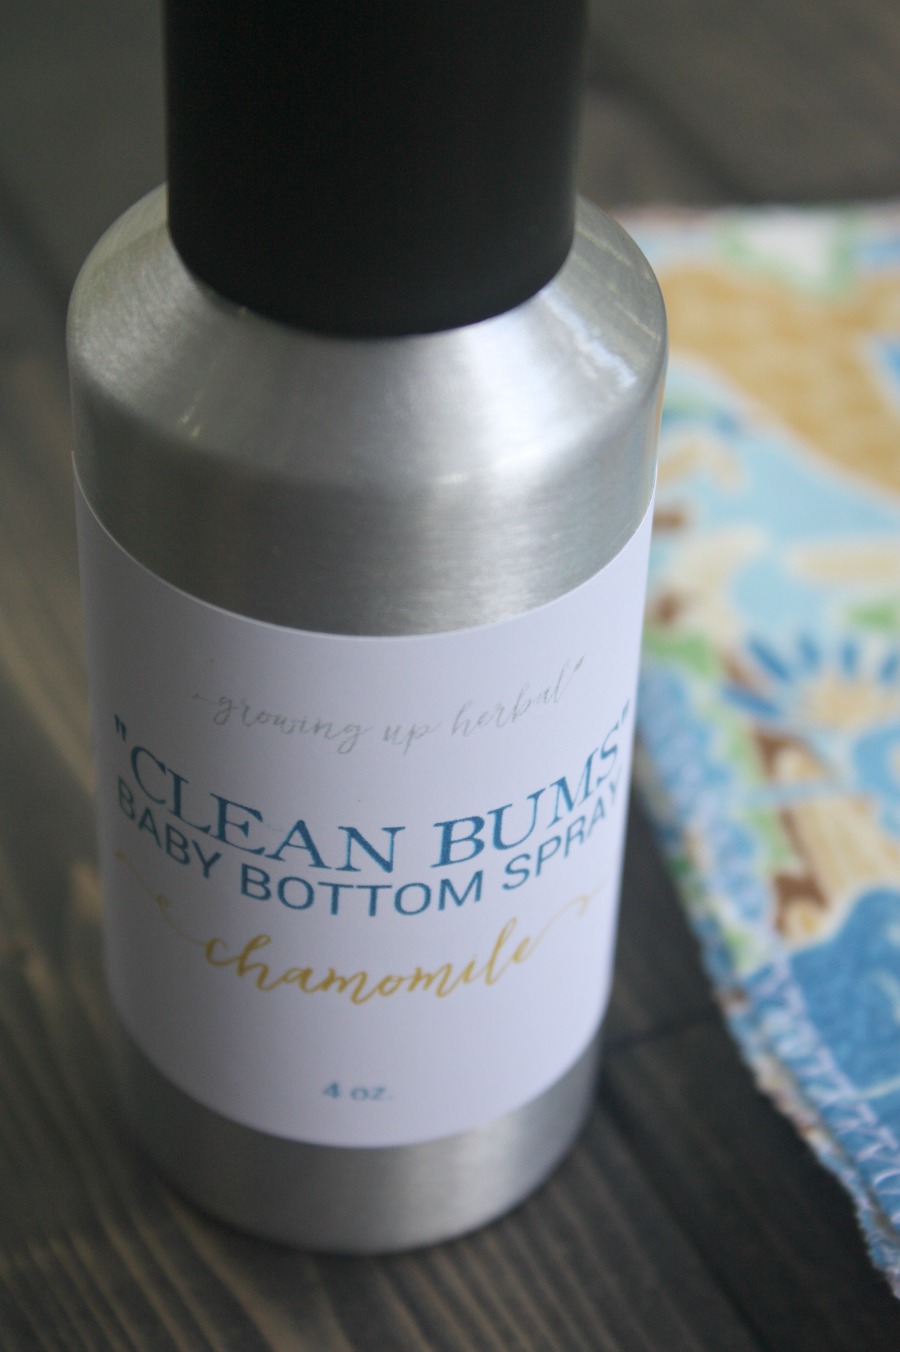 Homemade Baby Bottom Spray For Dirty Tushies | Growing Up Herbal | DIY wash for dirty baby bottoms. Smells great, easy to make, cleans bottoms well!